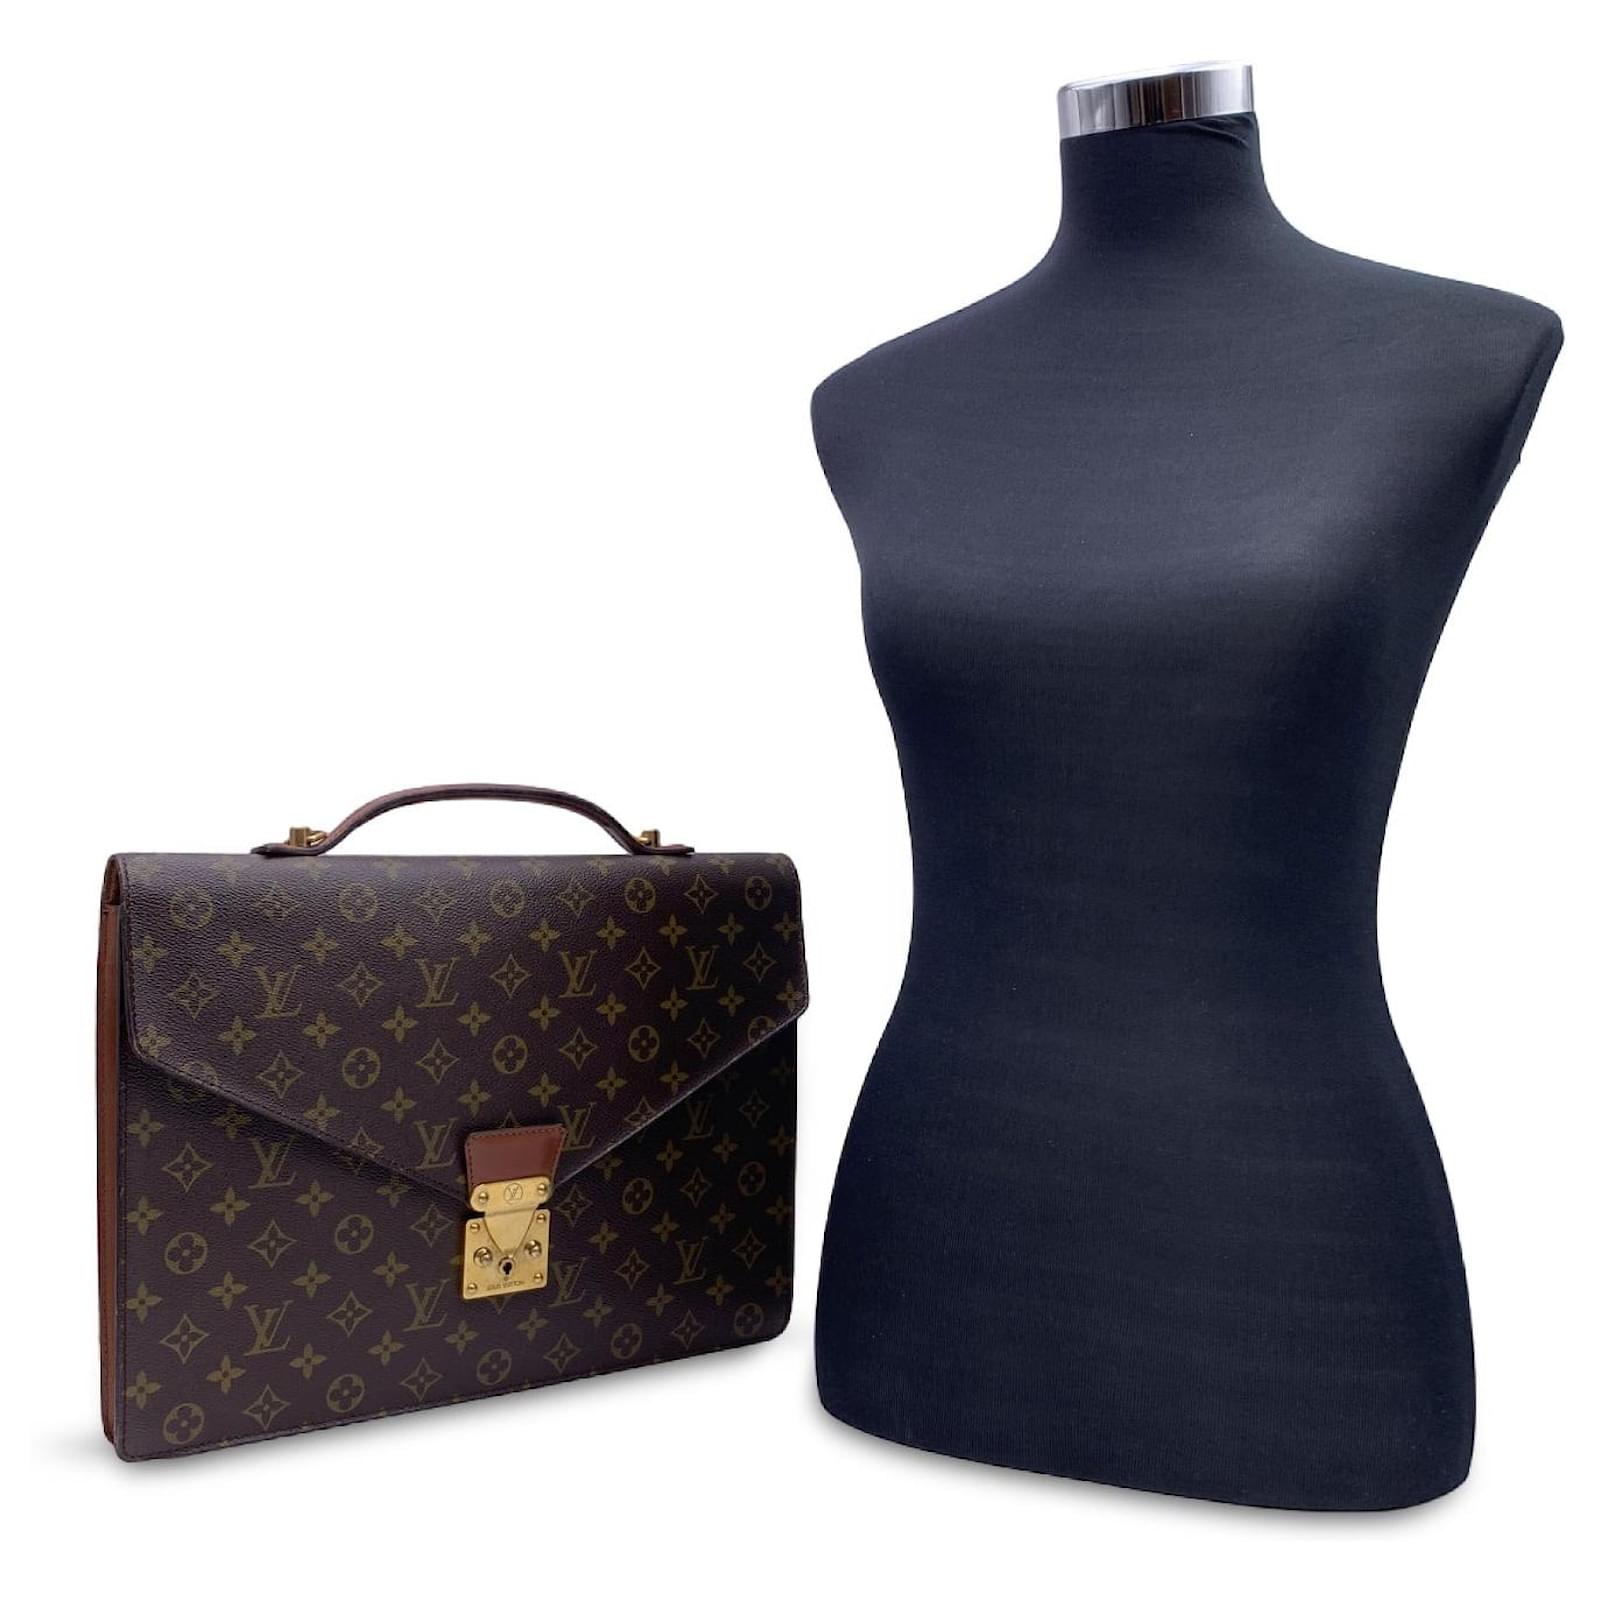 Beautiful piece from the past LV Serviette Conseiller Briefcase in